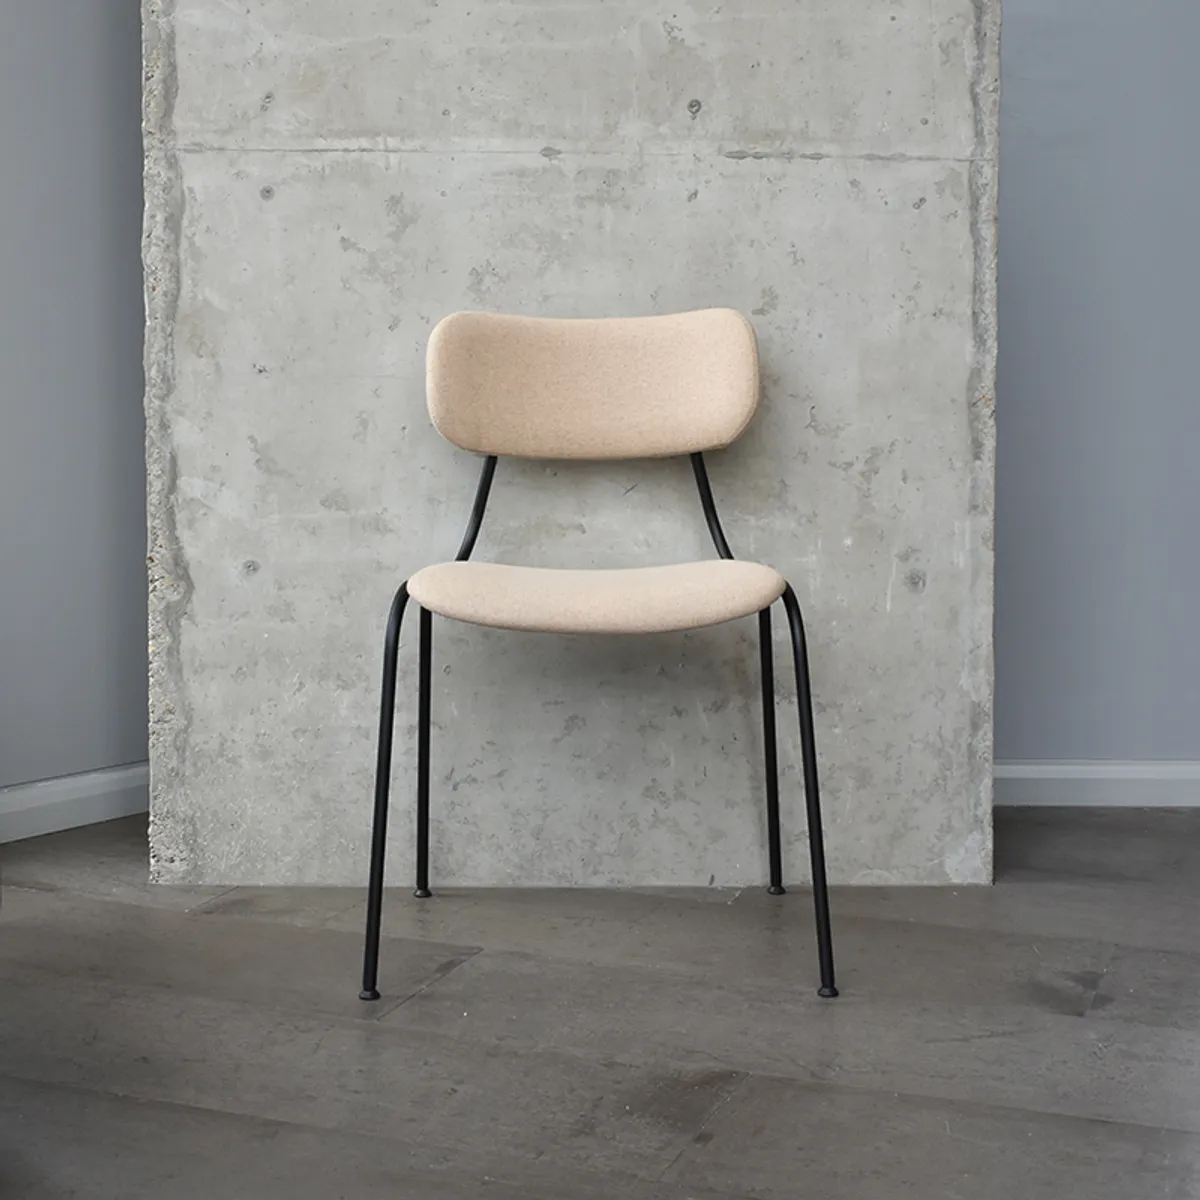 Kiyumi Soft Side Chair New Furniture From Milan 2019 By Inside Out Contracts 030